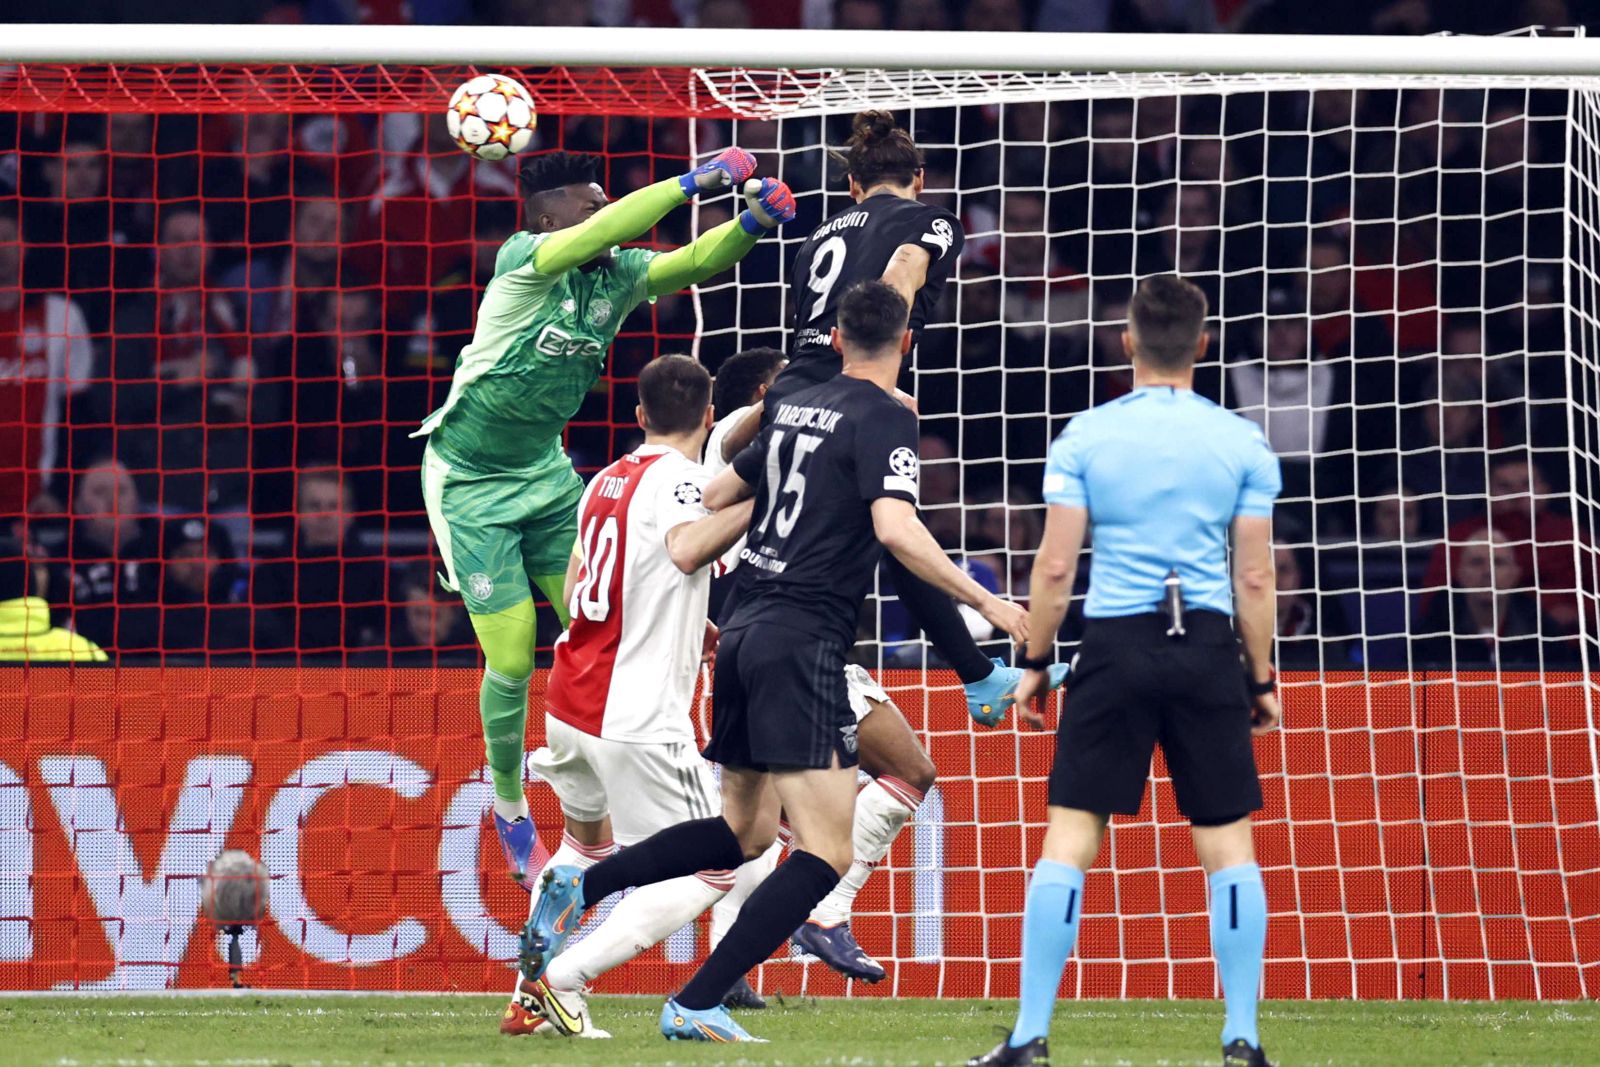 epa09827558 Ajax goalkeeper Andre Onana concedes the 0-1 by Darwin Nunez or SL Benfica (C) during the UEFA Champions League round of 16 soccer match between Ajax Amsterdam and Benfica Lisbon  at the Johan Cruijff ArenA in Amsterdam, Netherlands, 15 March 2022.  EPA/MAURICE VAN STEEN